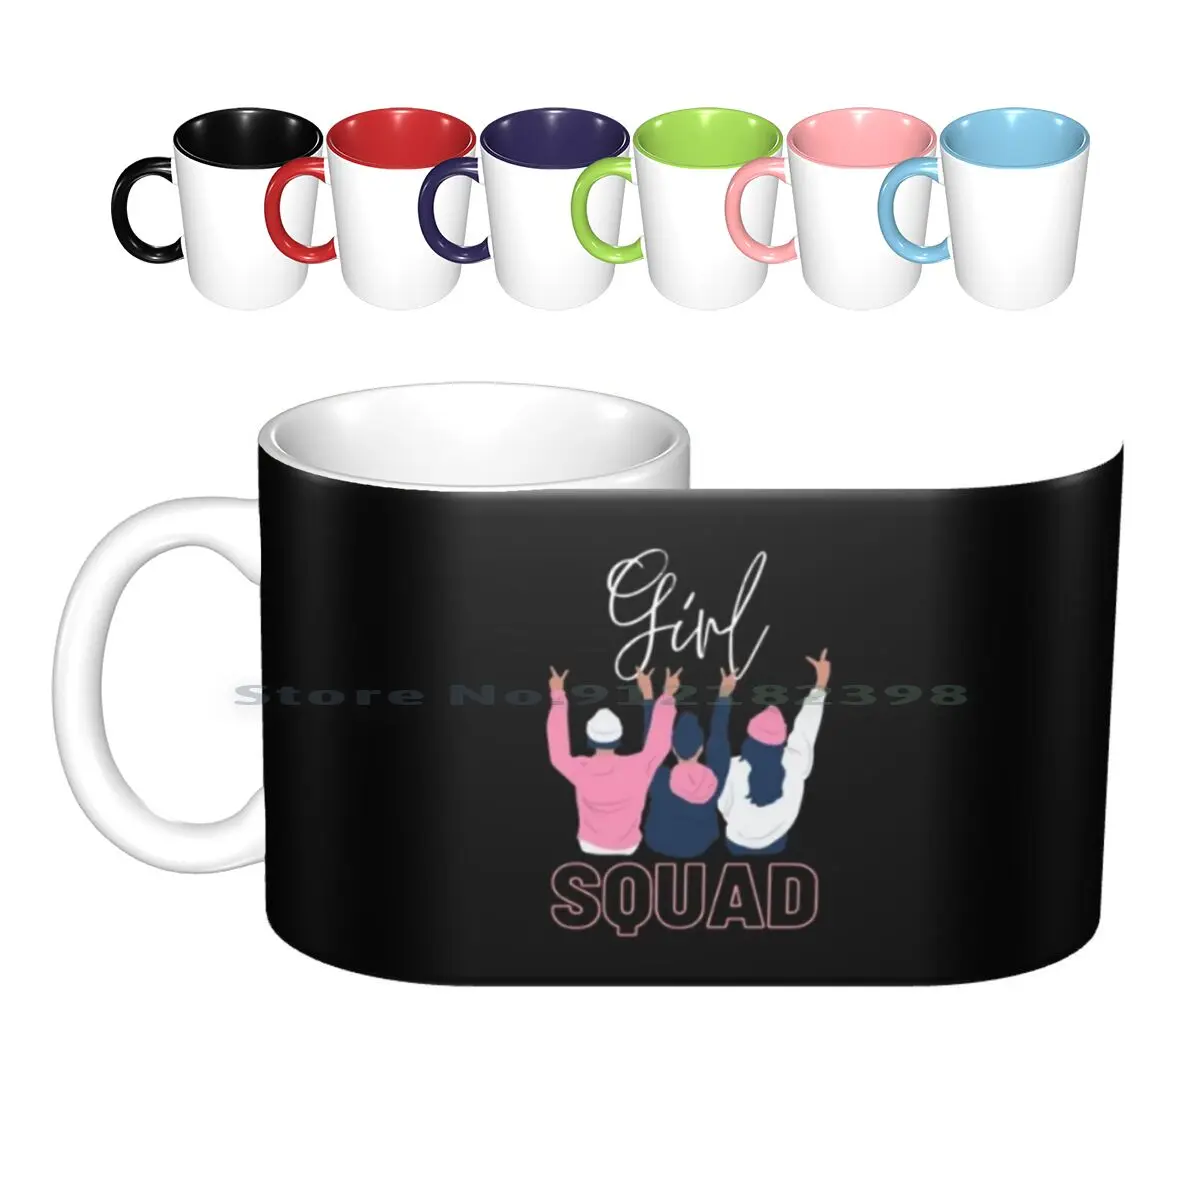 

Girl Squad Typography With Girl With Peace Illustration. Ceramic Mugs Coffee Cups Milk Tea Mug Girls Feminist Squad Goals